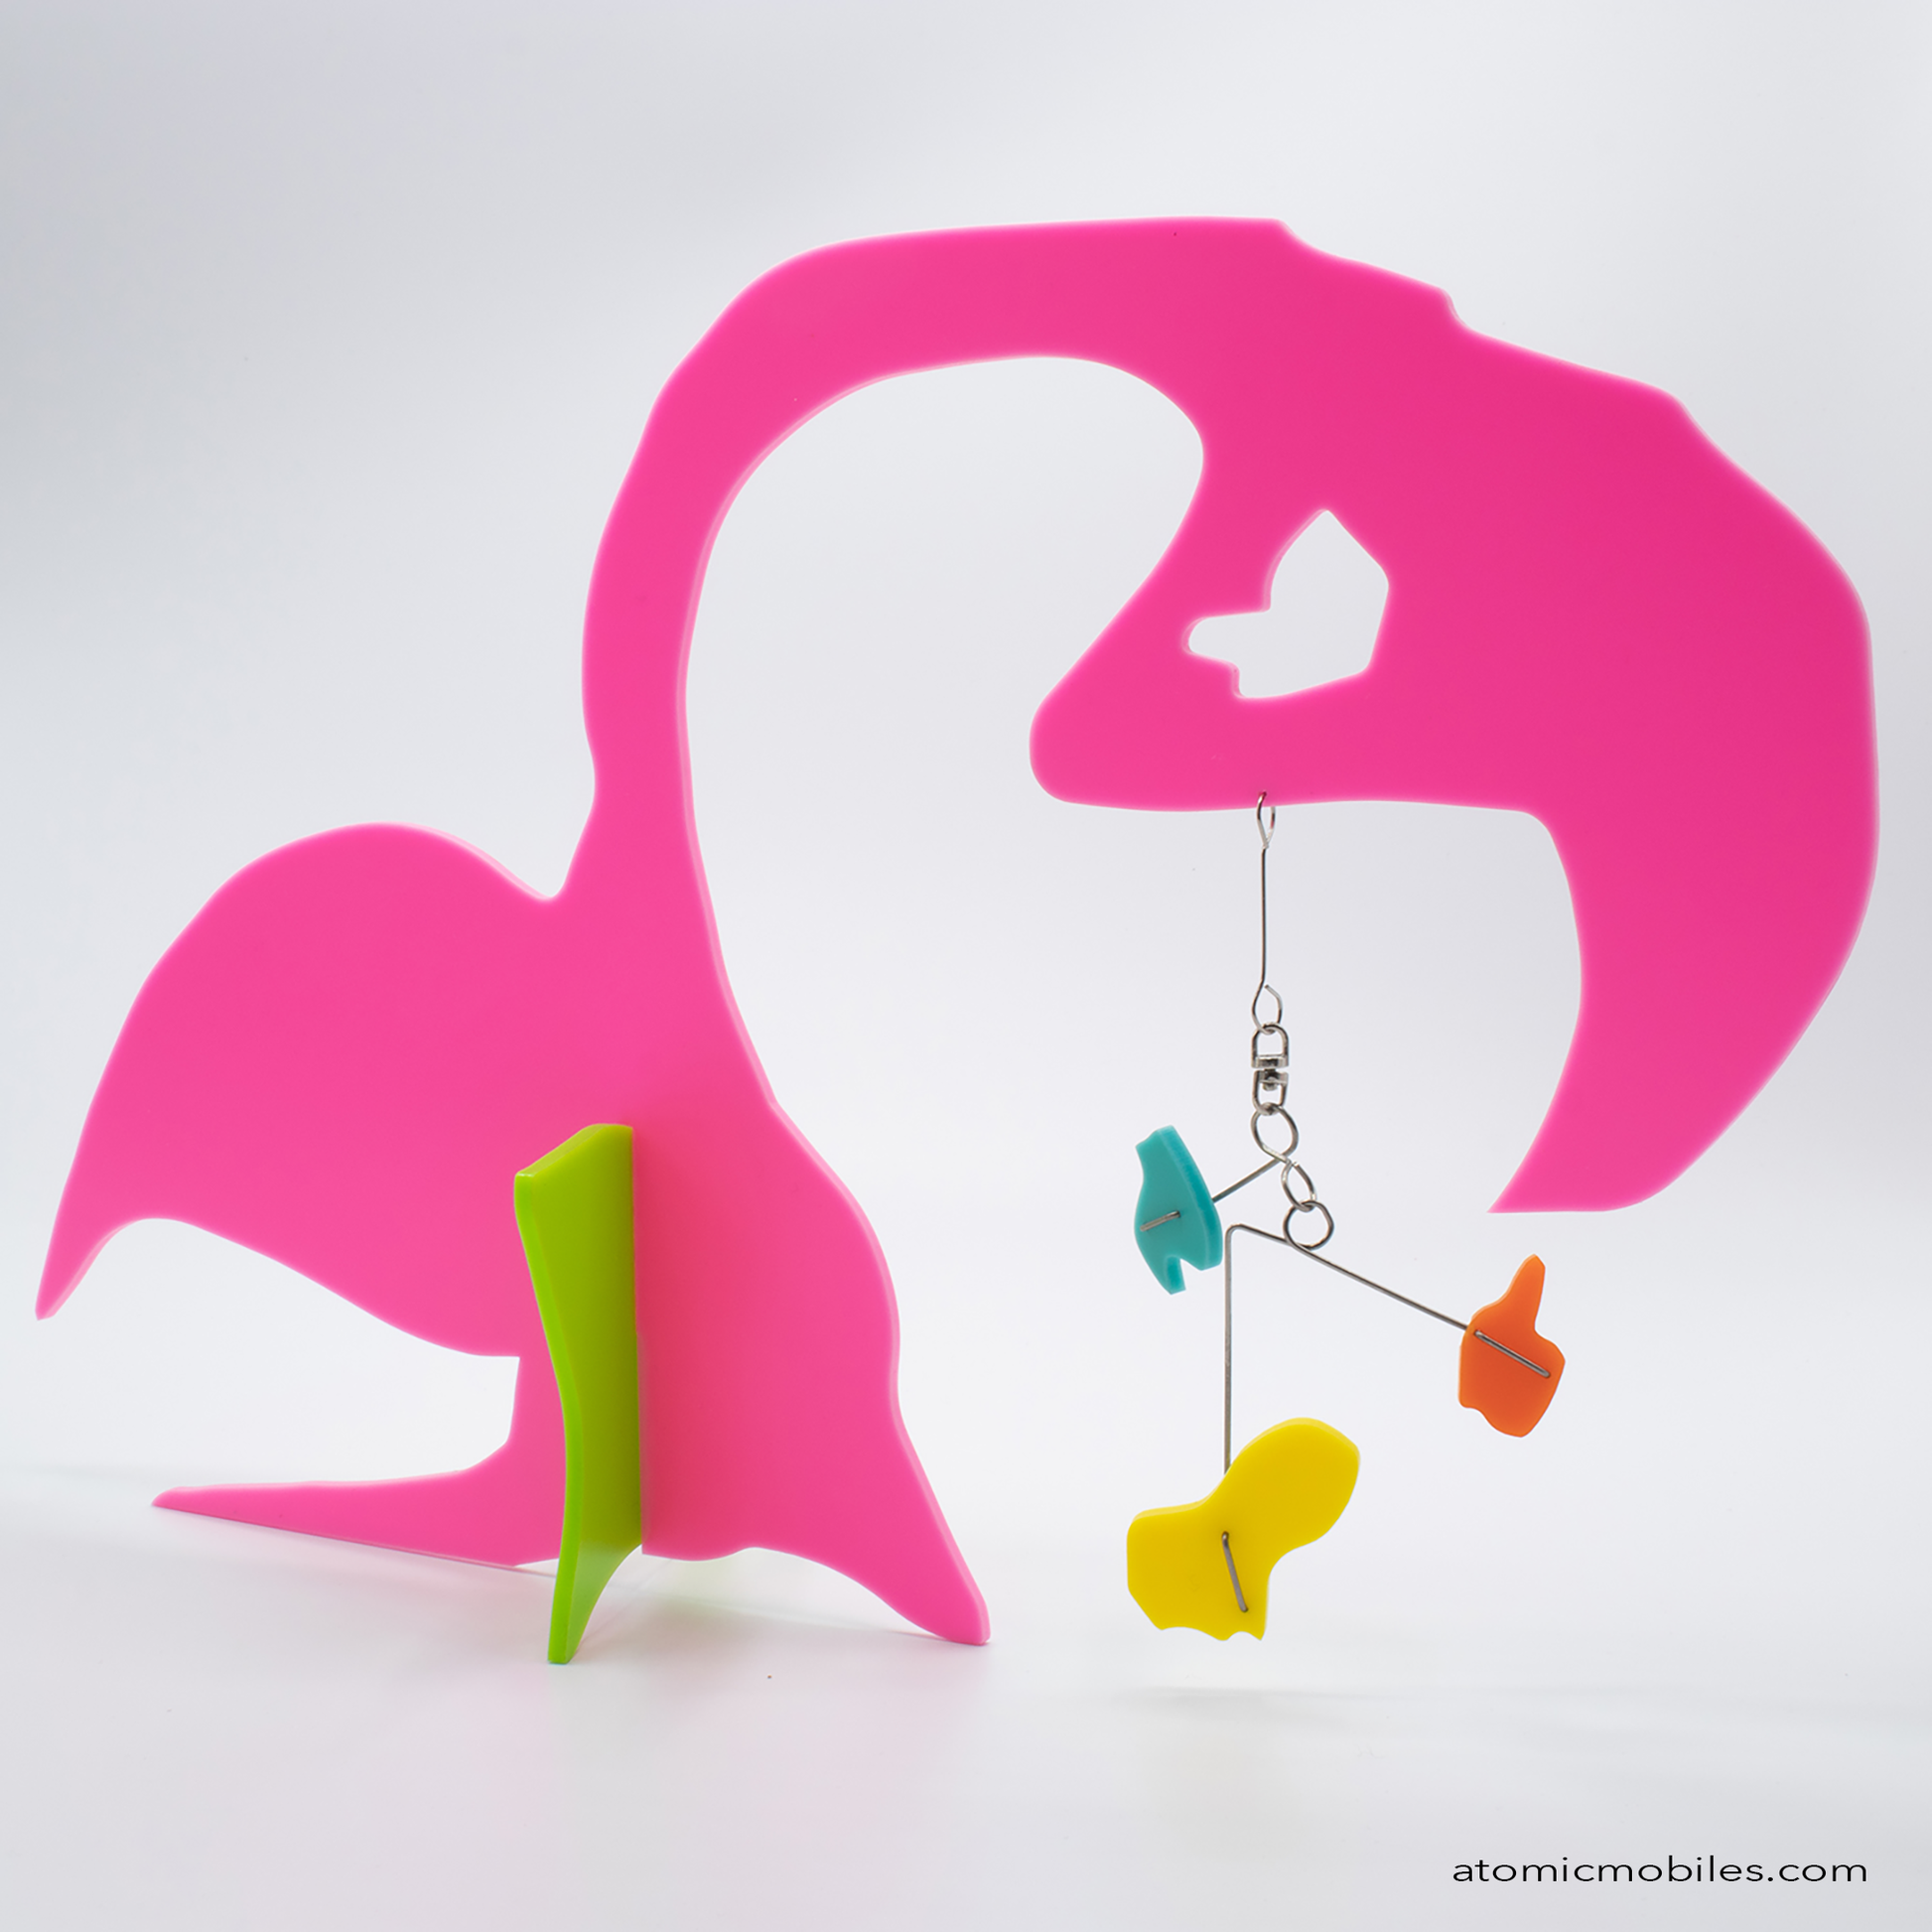 KinetiCats Collection Flamingo in Hot Pink, Lime Green, Orange, Yellow, Aqua - one of 12 Modern Cute Abstract Animal Art Sculpture Kinetic Stabiles inspired by Dada and mid century modern style art by AtomicMobiles.com